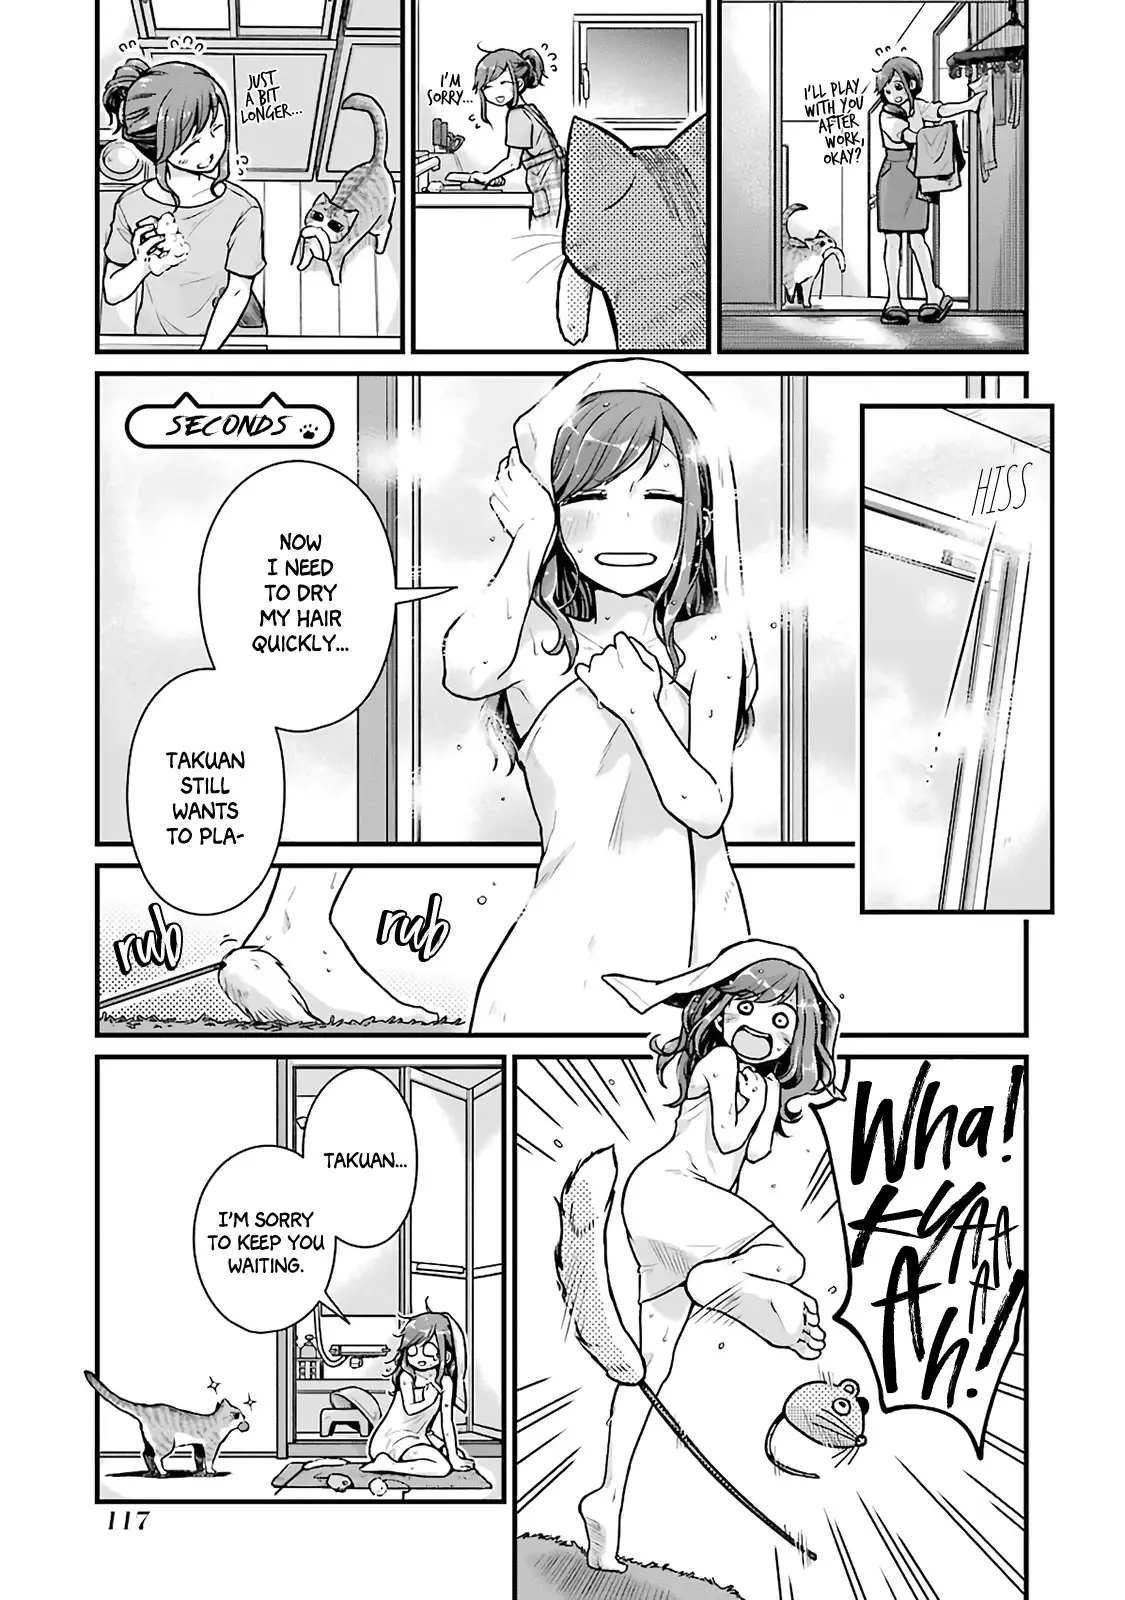 5 Minutes With You At A Convenience Store - 13 page 9